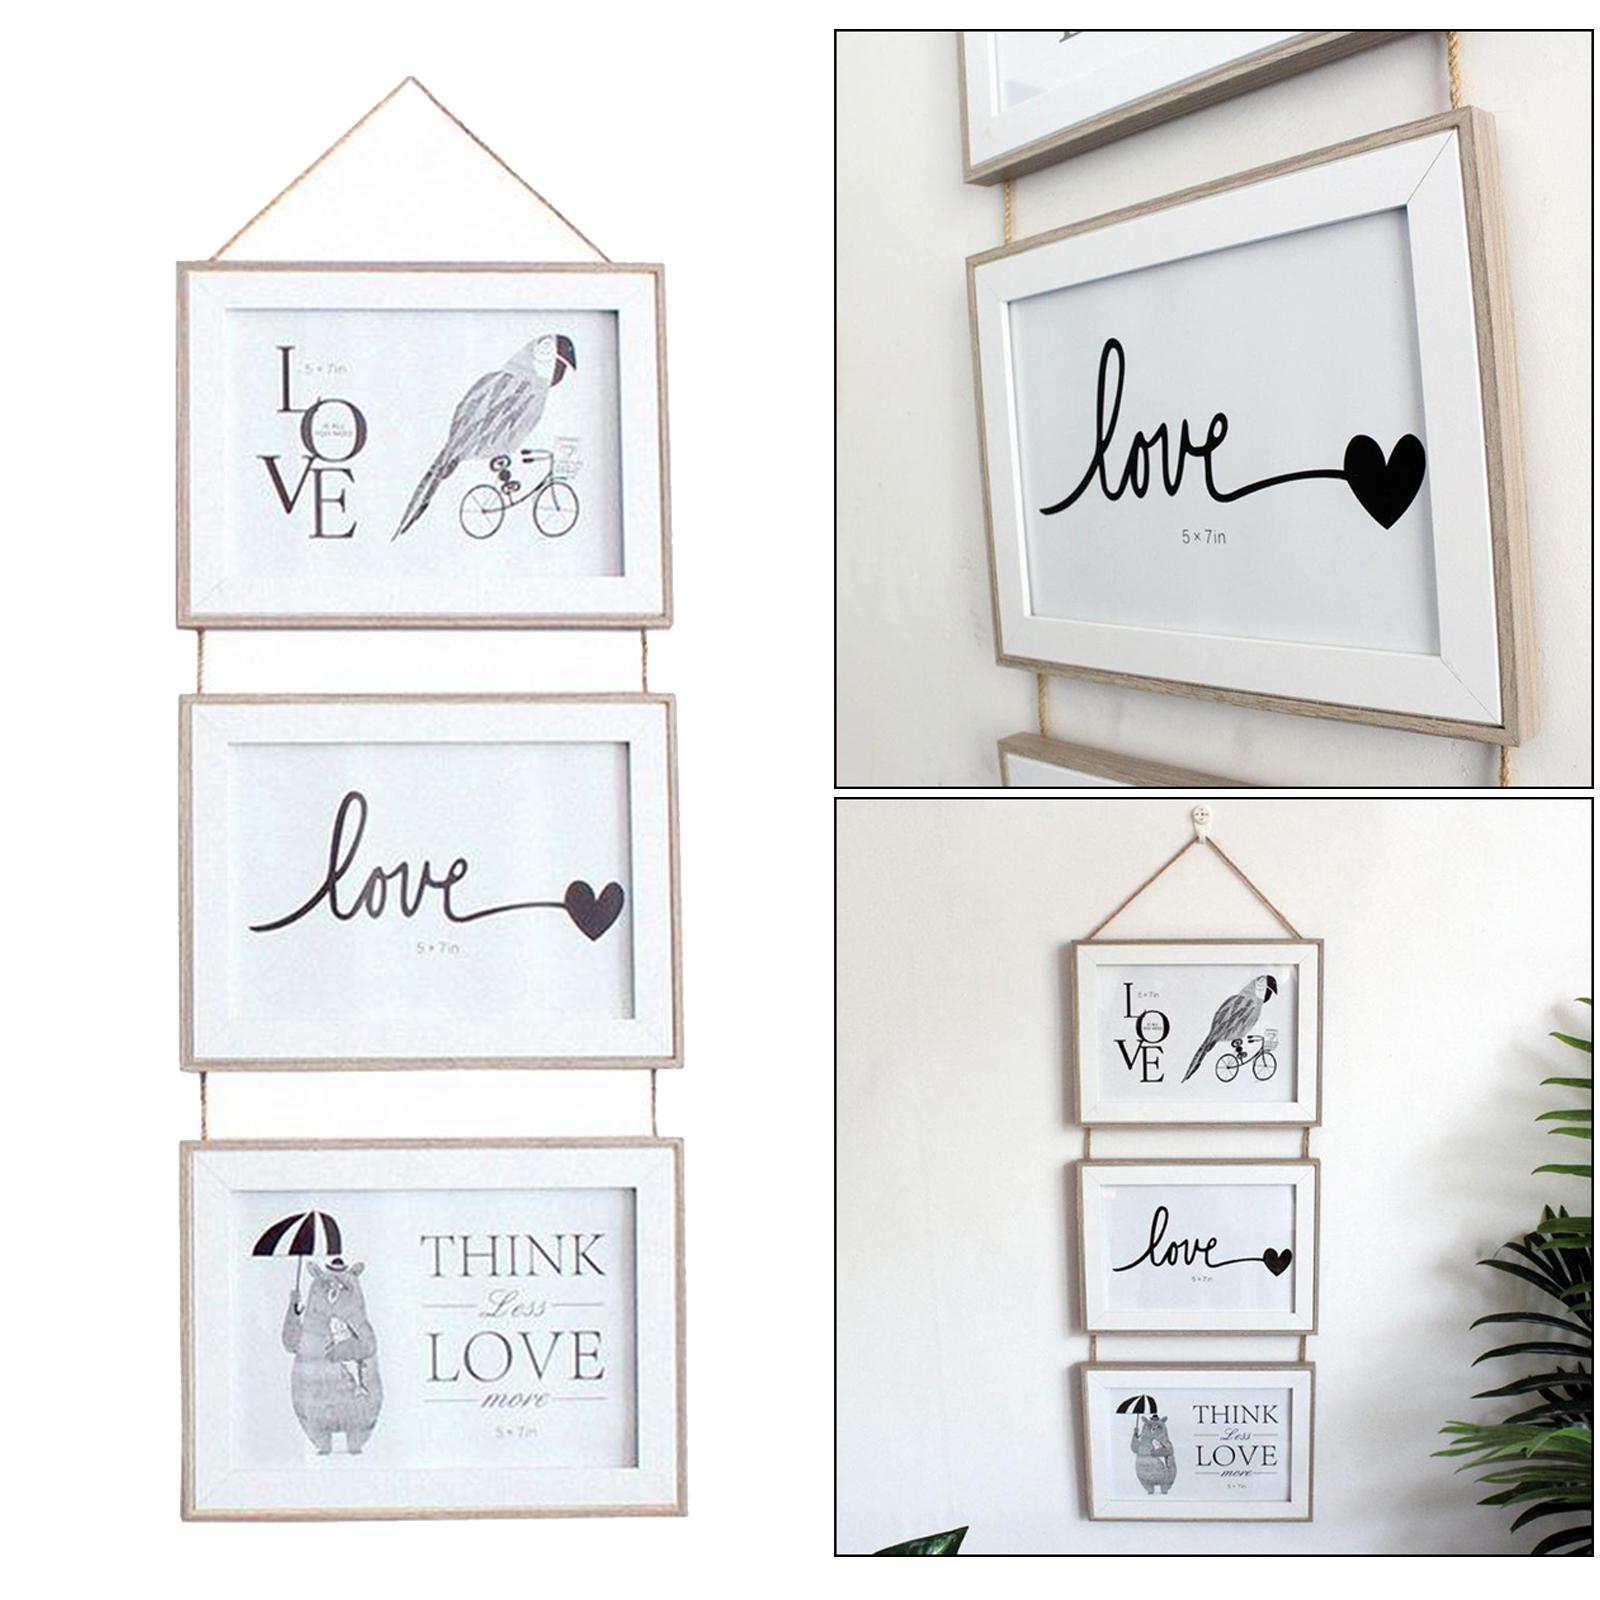 3x 4x6 inch / 5x7 inch Picture Frames for Wall Hanging 6 inch  light gray